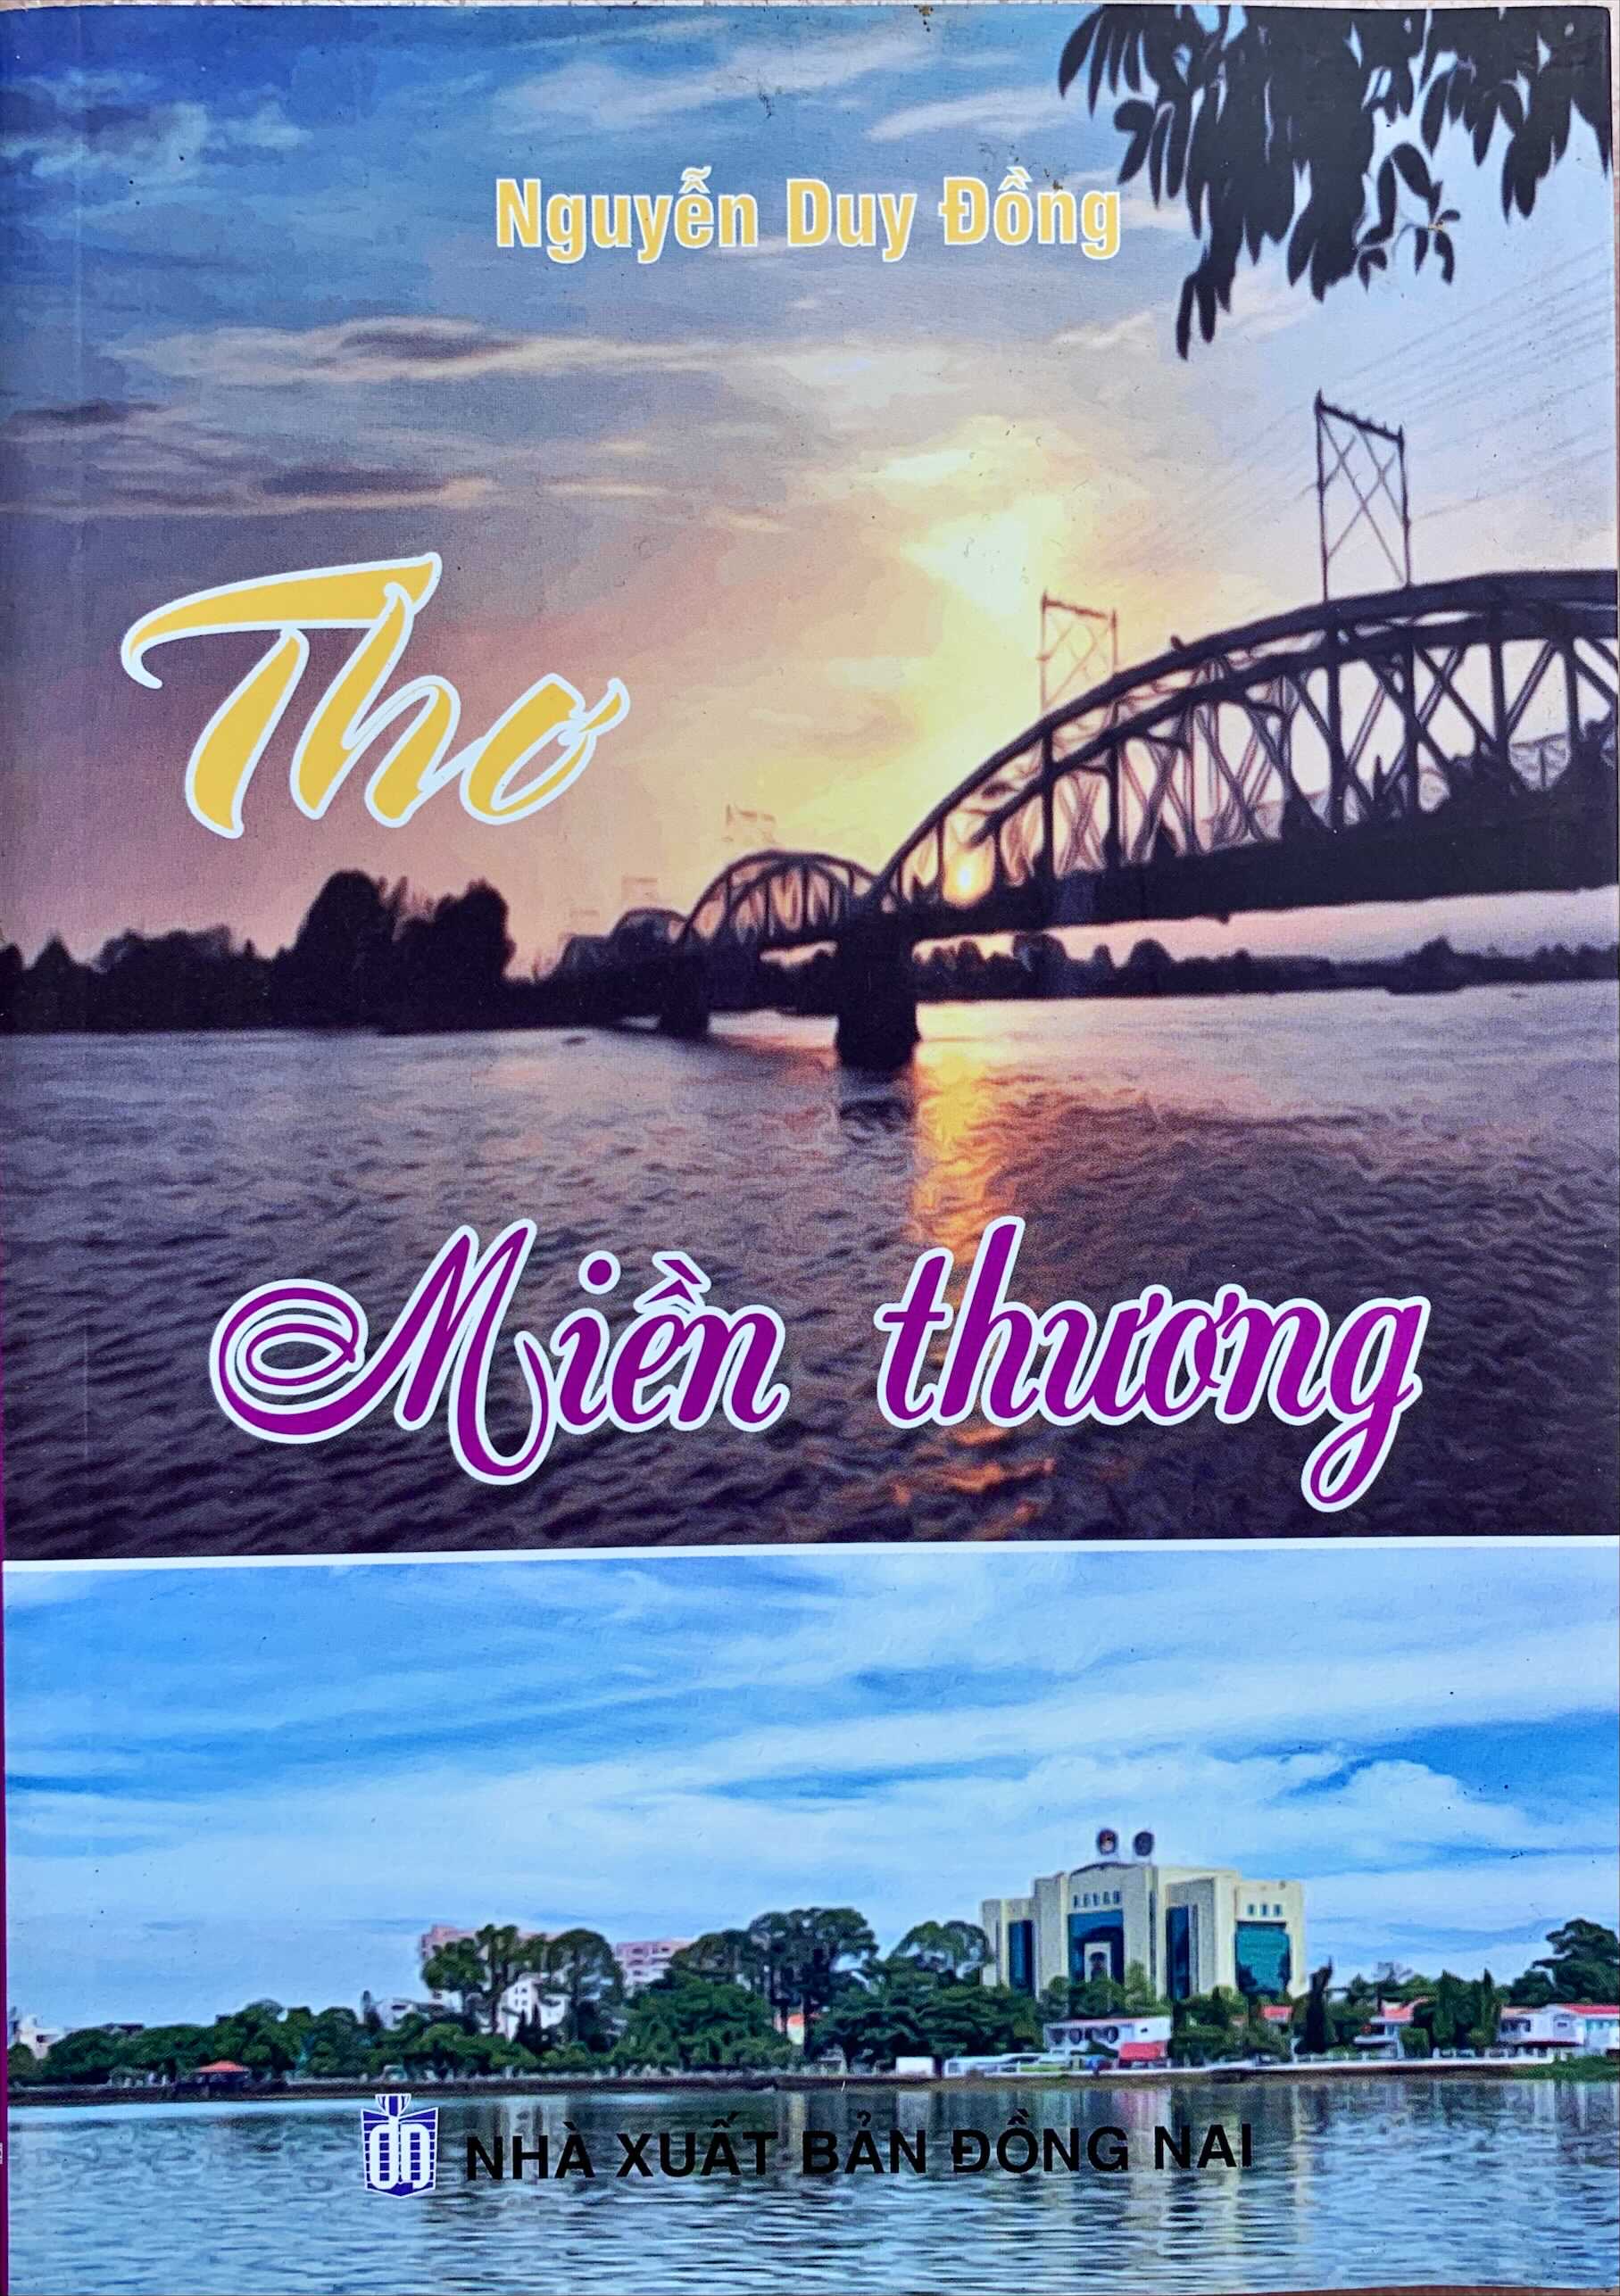 BS mien thuong - duy dong.JPG